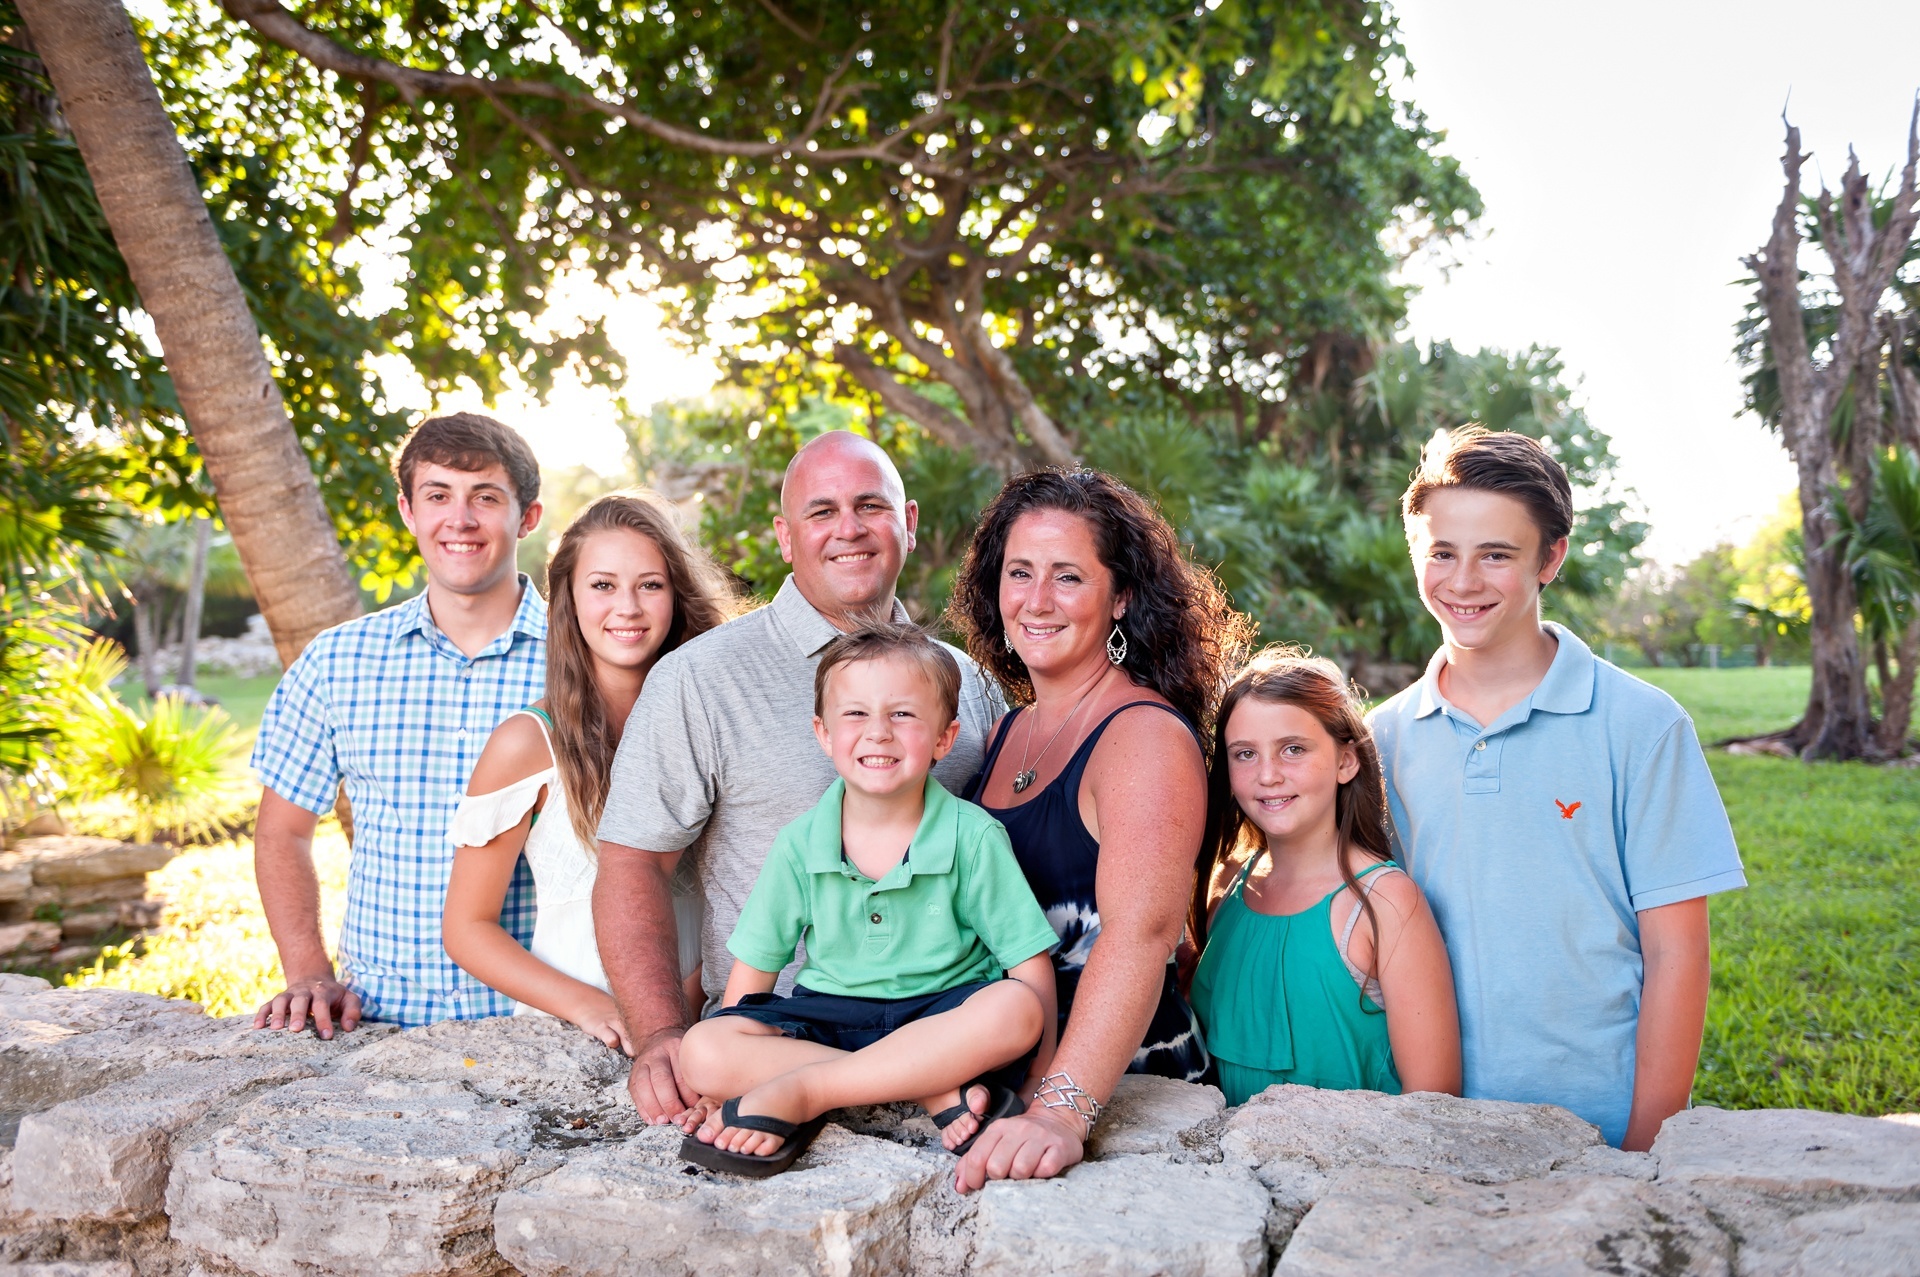 The Cederholms Family Vacation in Playa del Carmen Photo Session